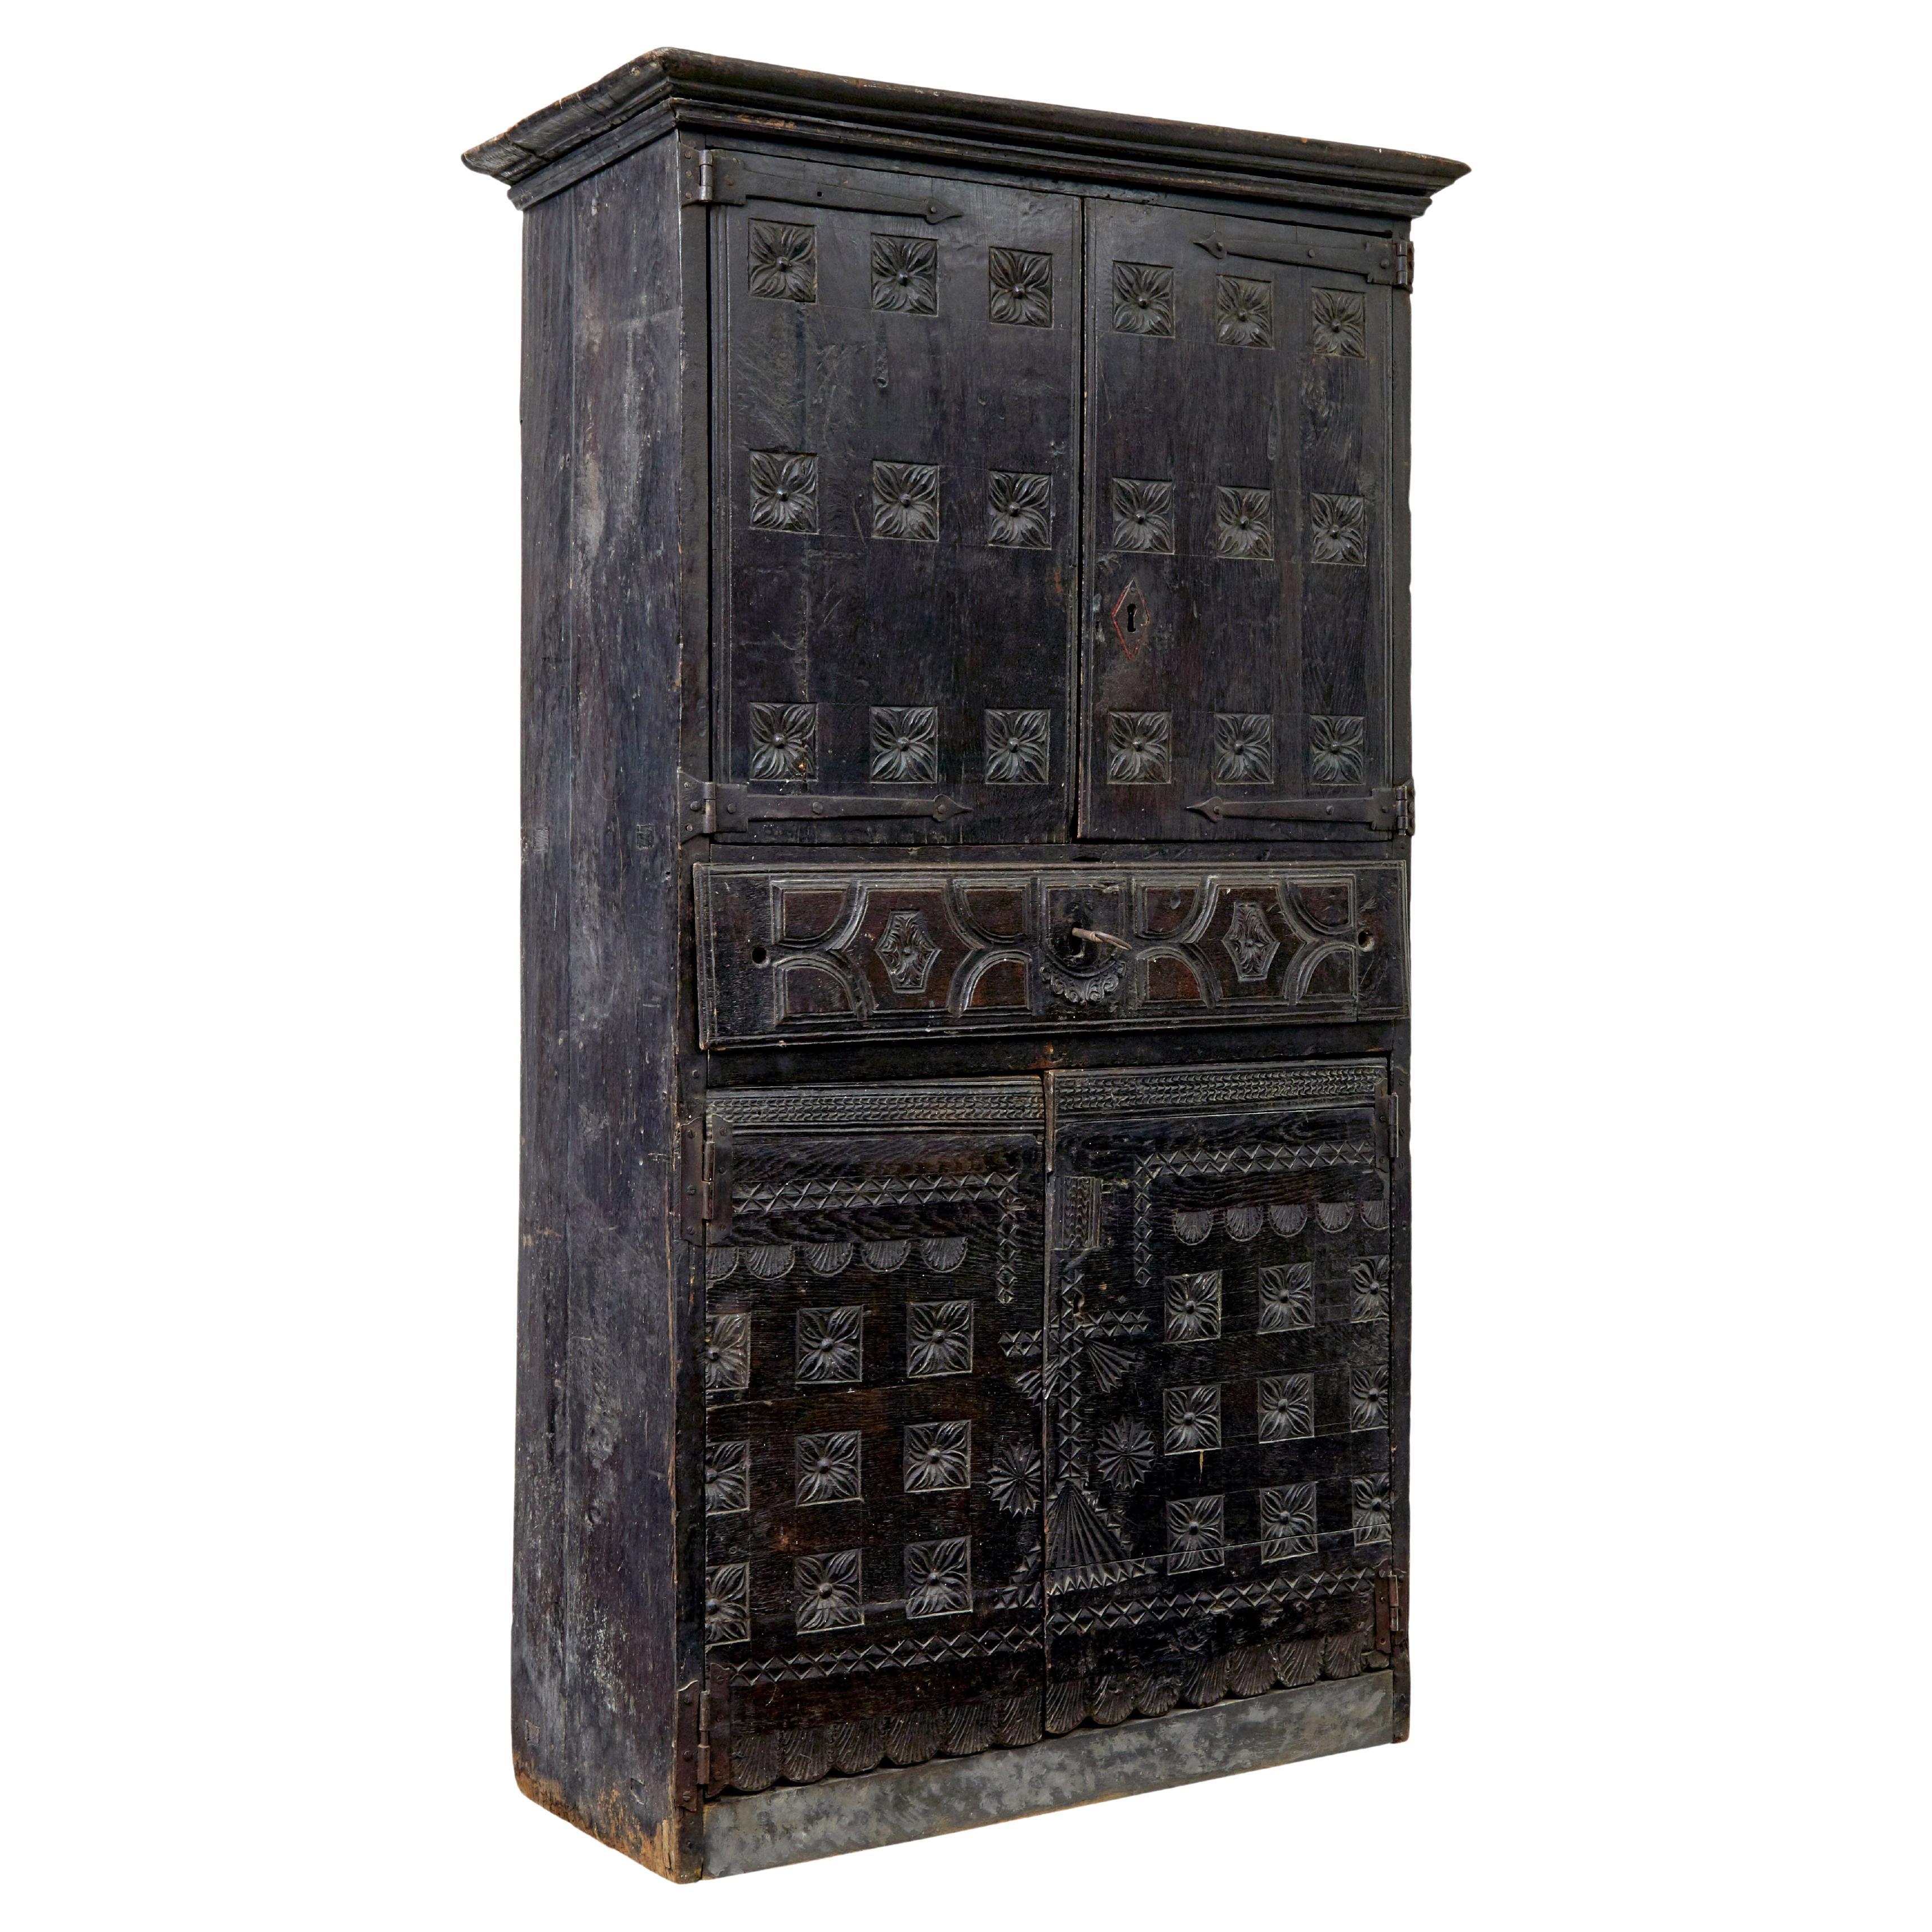 Early 19th century Pyrenean folk art oak and chestnut carved cupboard